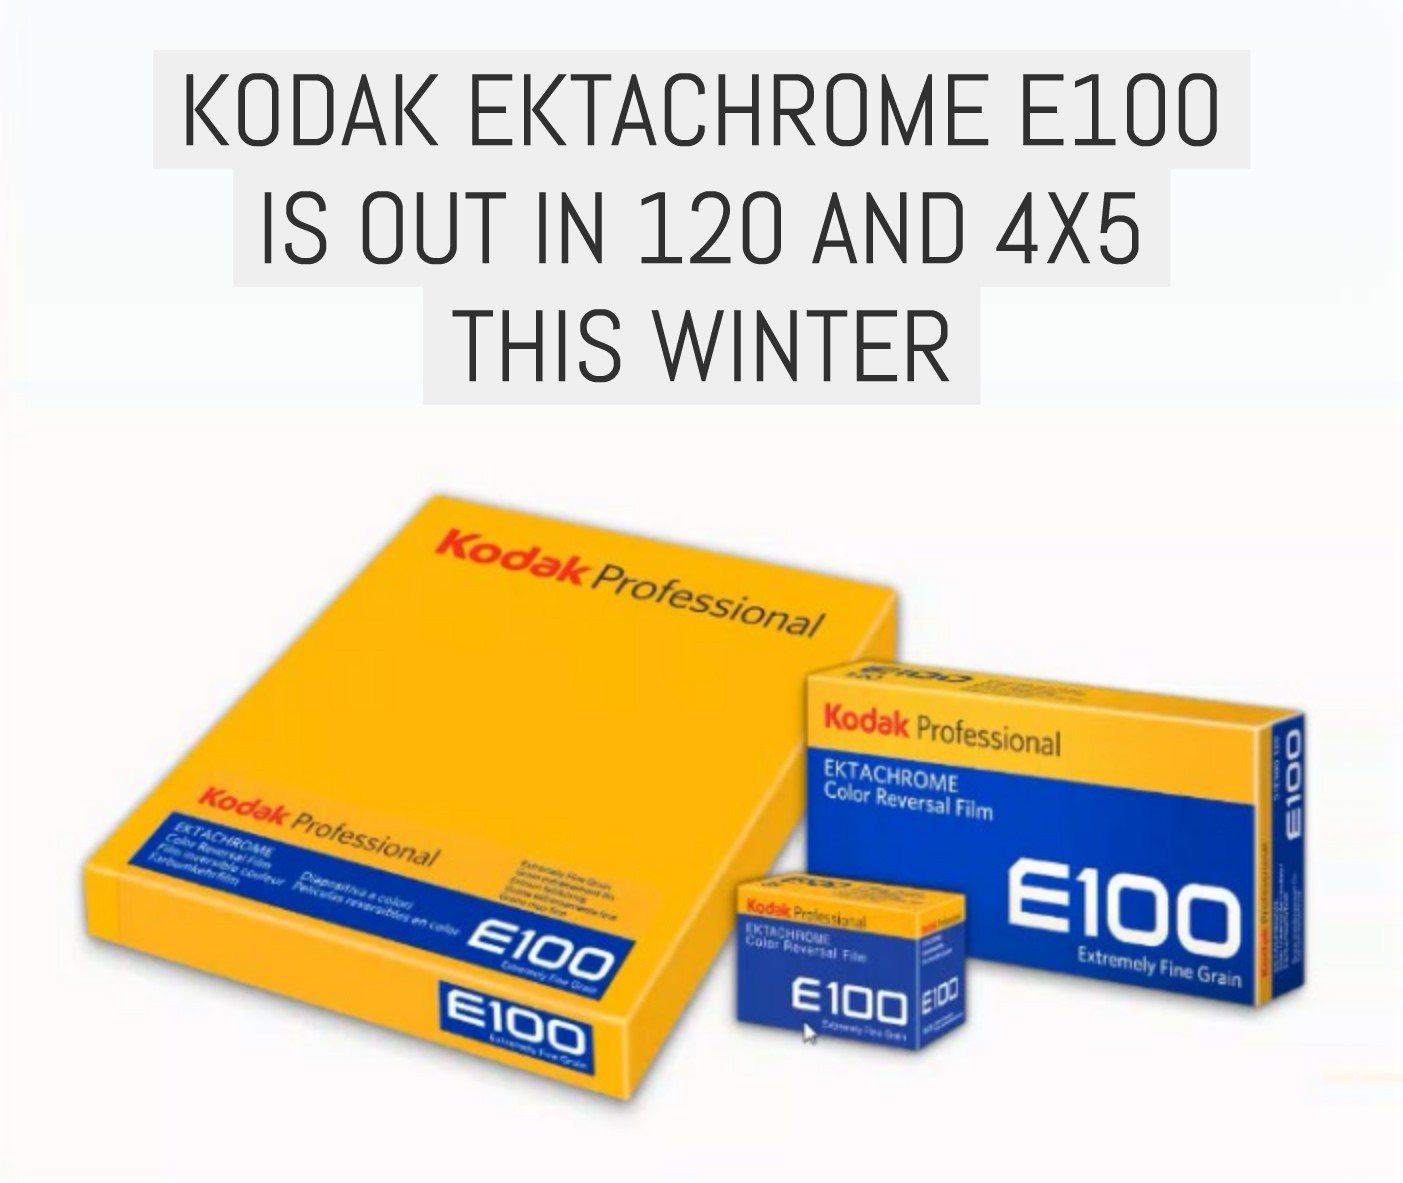 It’s OFFICIAL: Kodak EKTACHROME E100 is out in 120 and 4×5 this Winter [UPDATE 03]